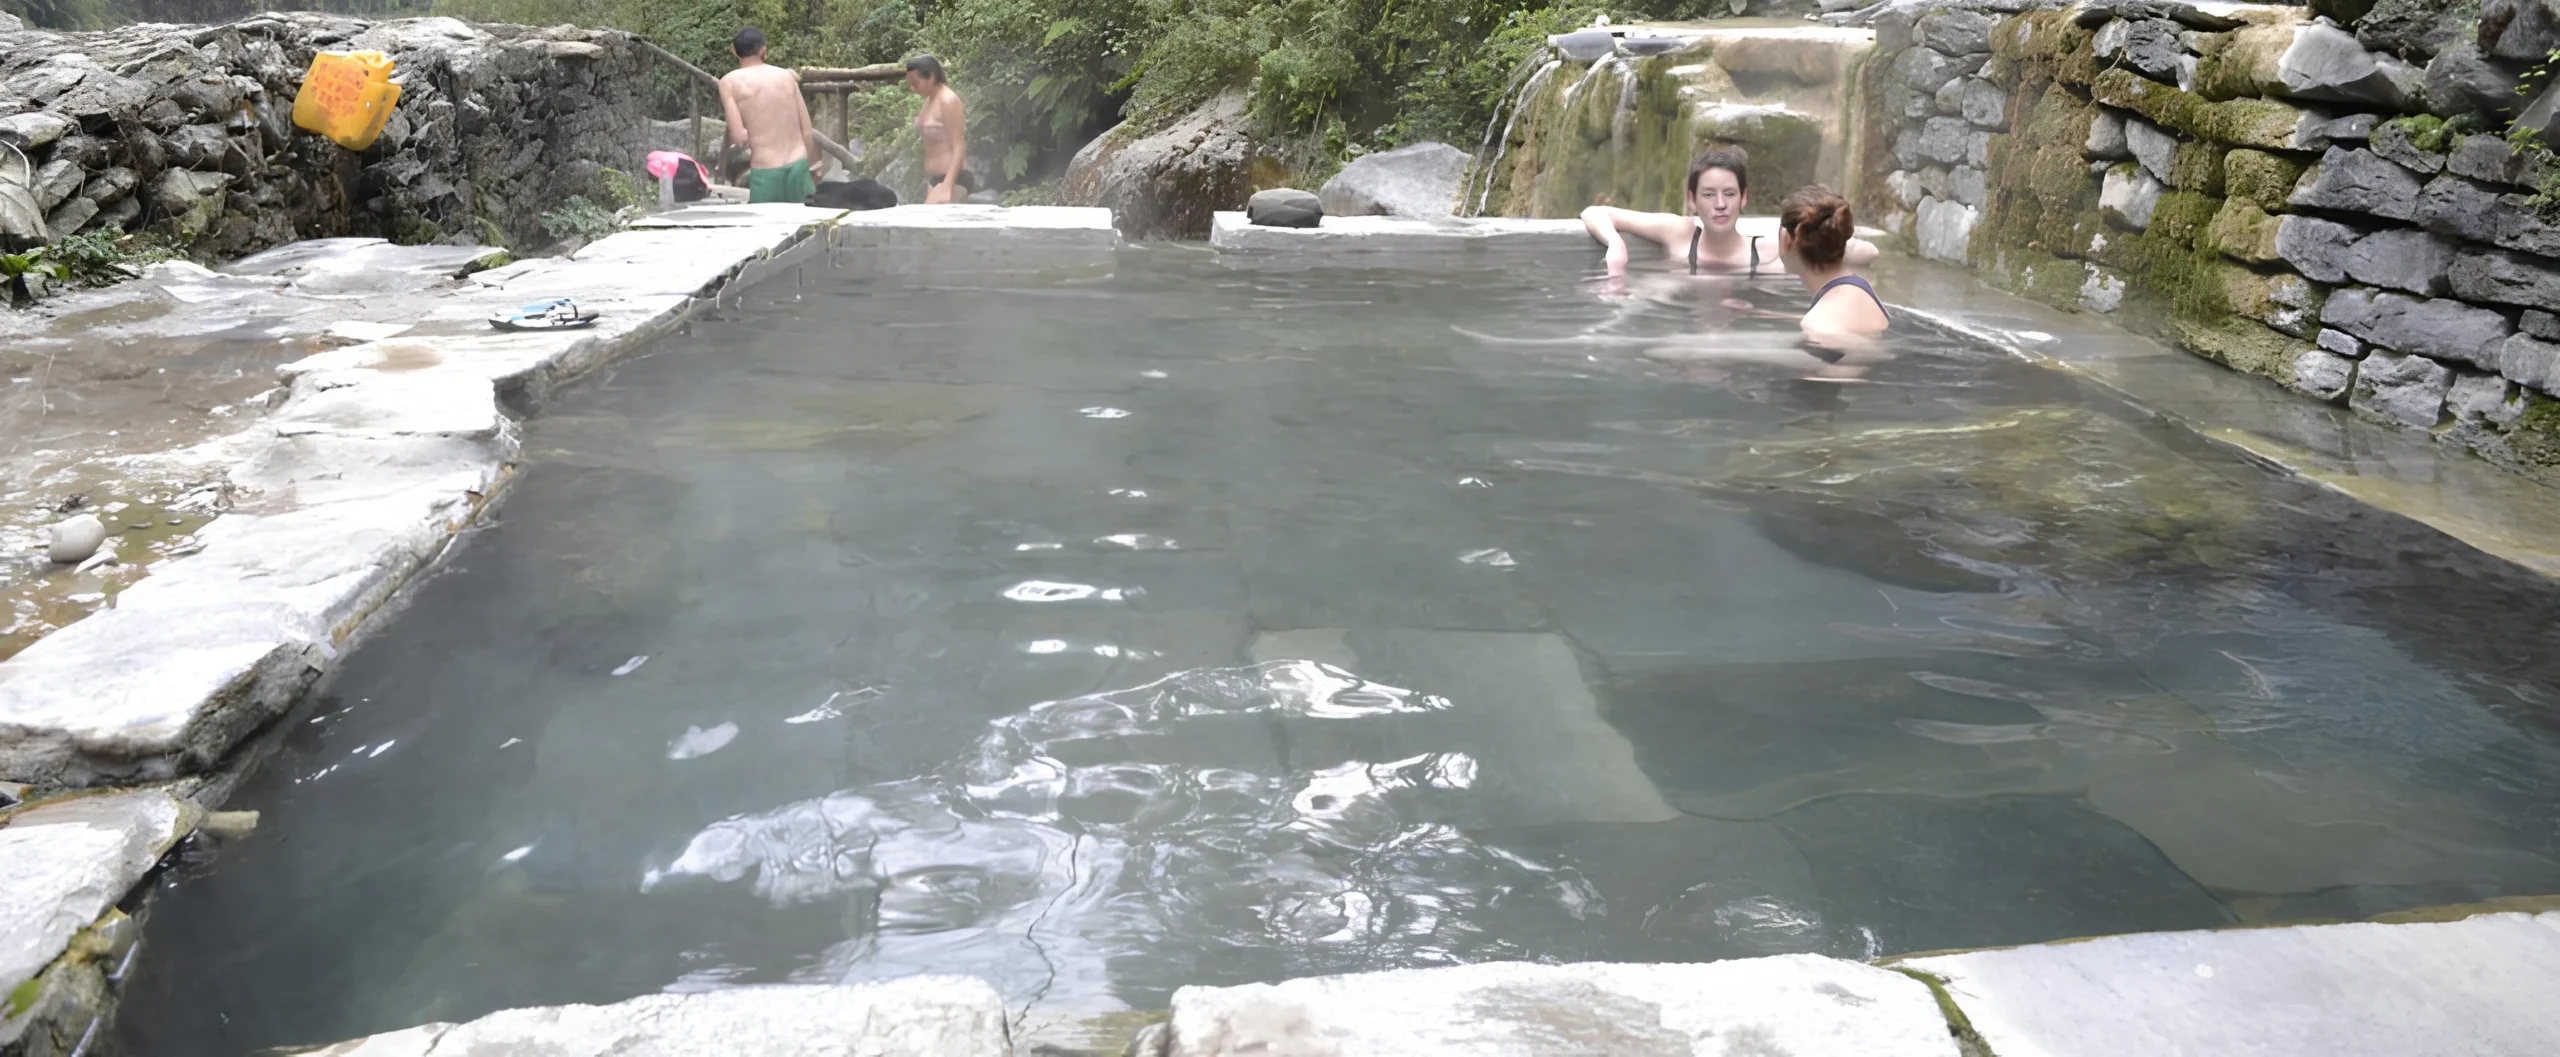 Swim at a Naturally Occurring Hot Spring